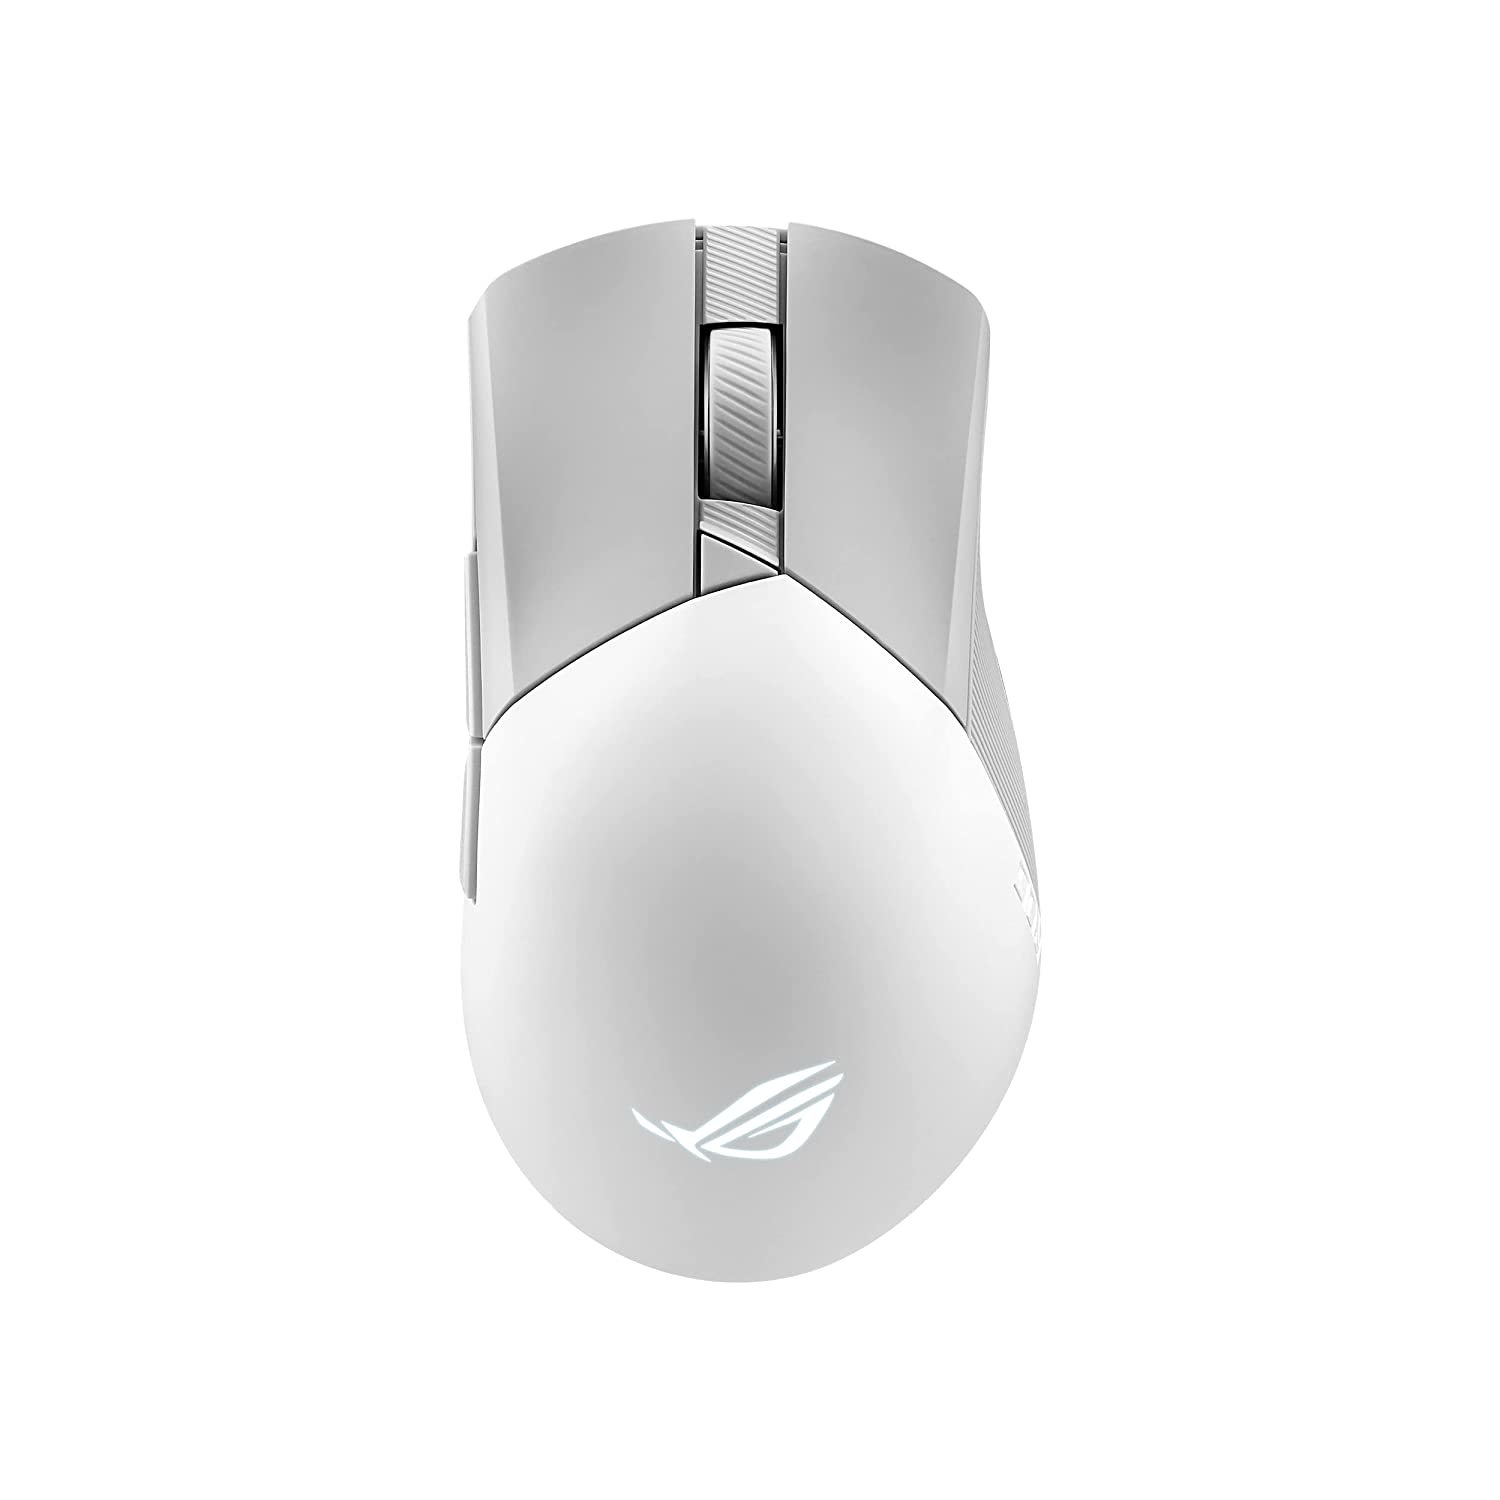 ASUS ROG Gladius III Wireless AimPoint Gaming Mouse, Connectivity (2.4GHz RF, Bl - $135.99